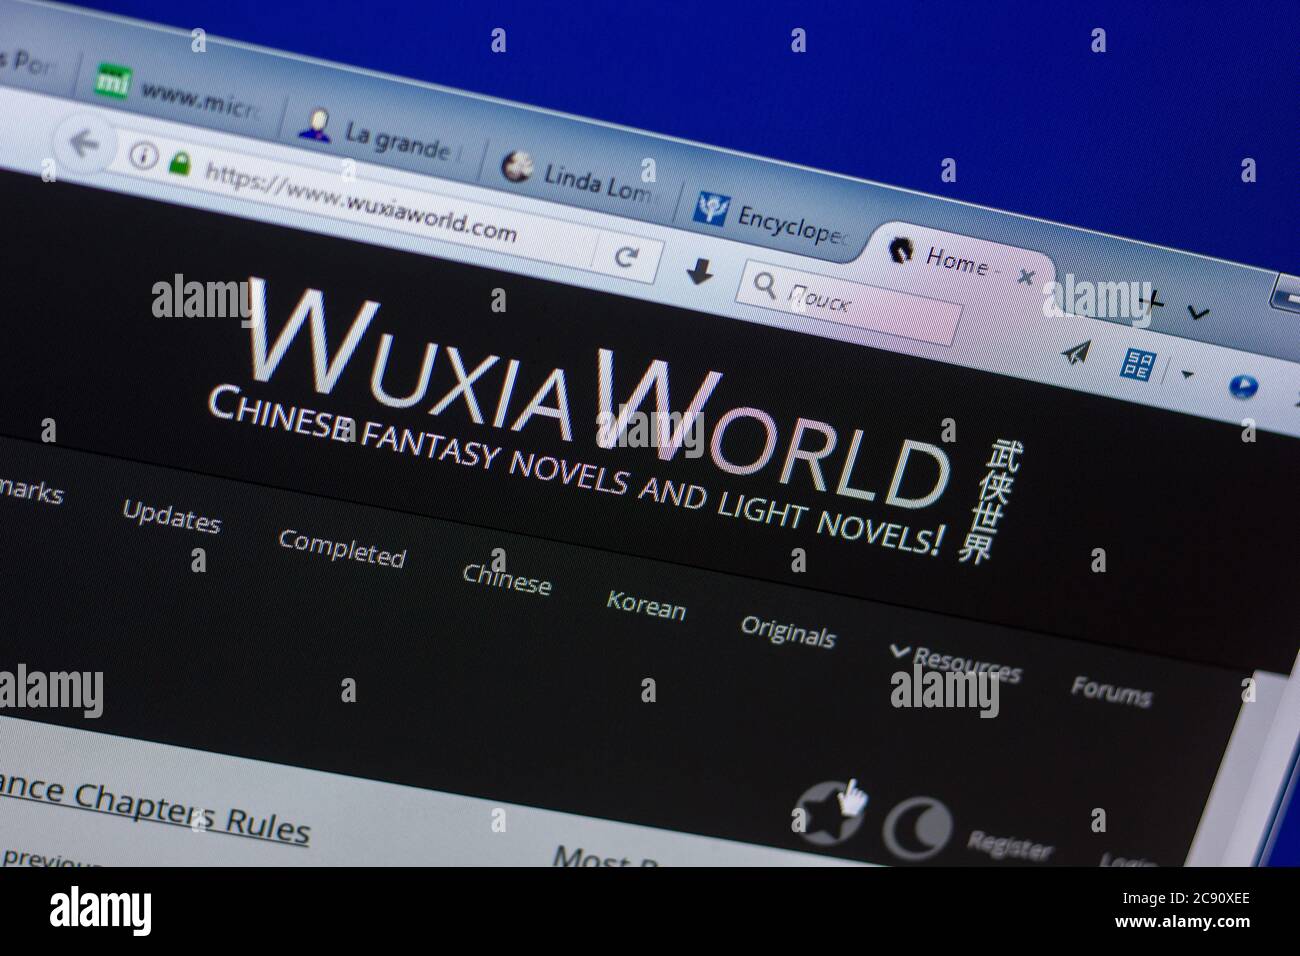 Wuxiaworld site